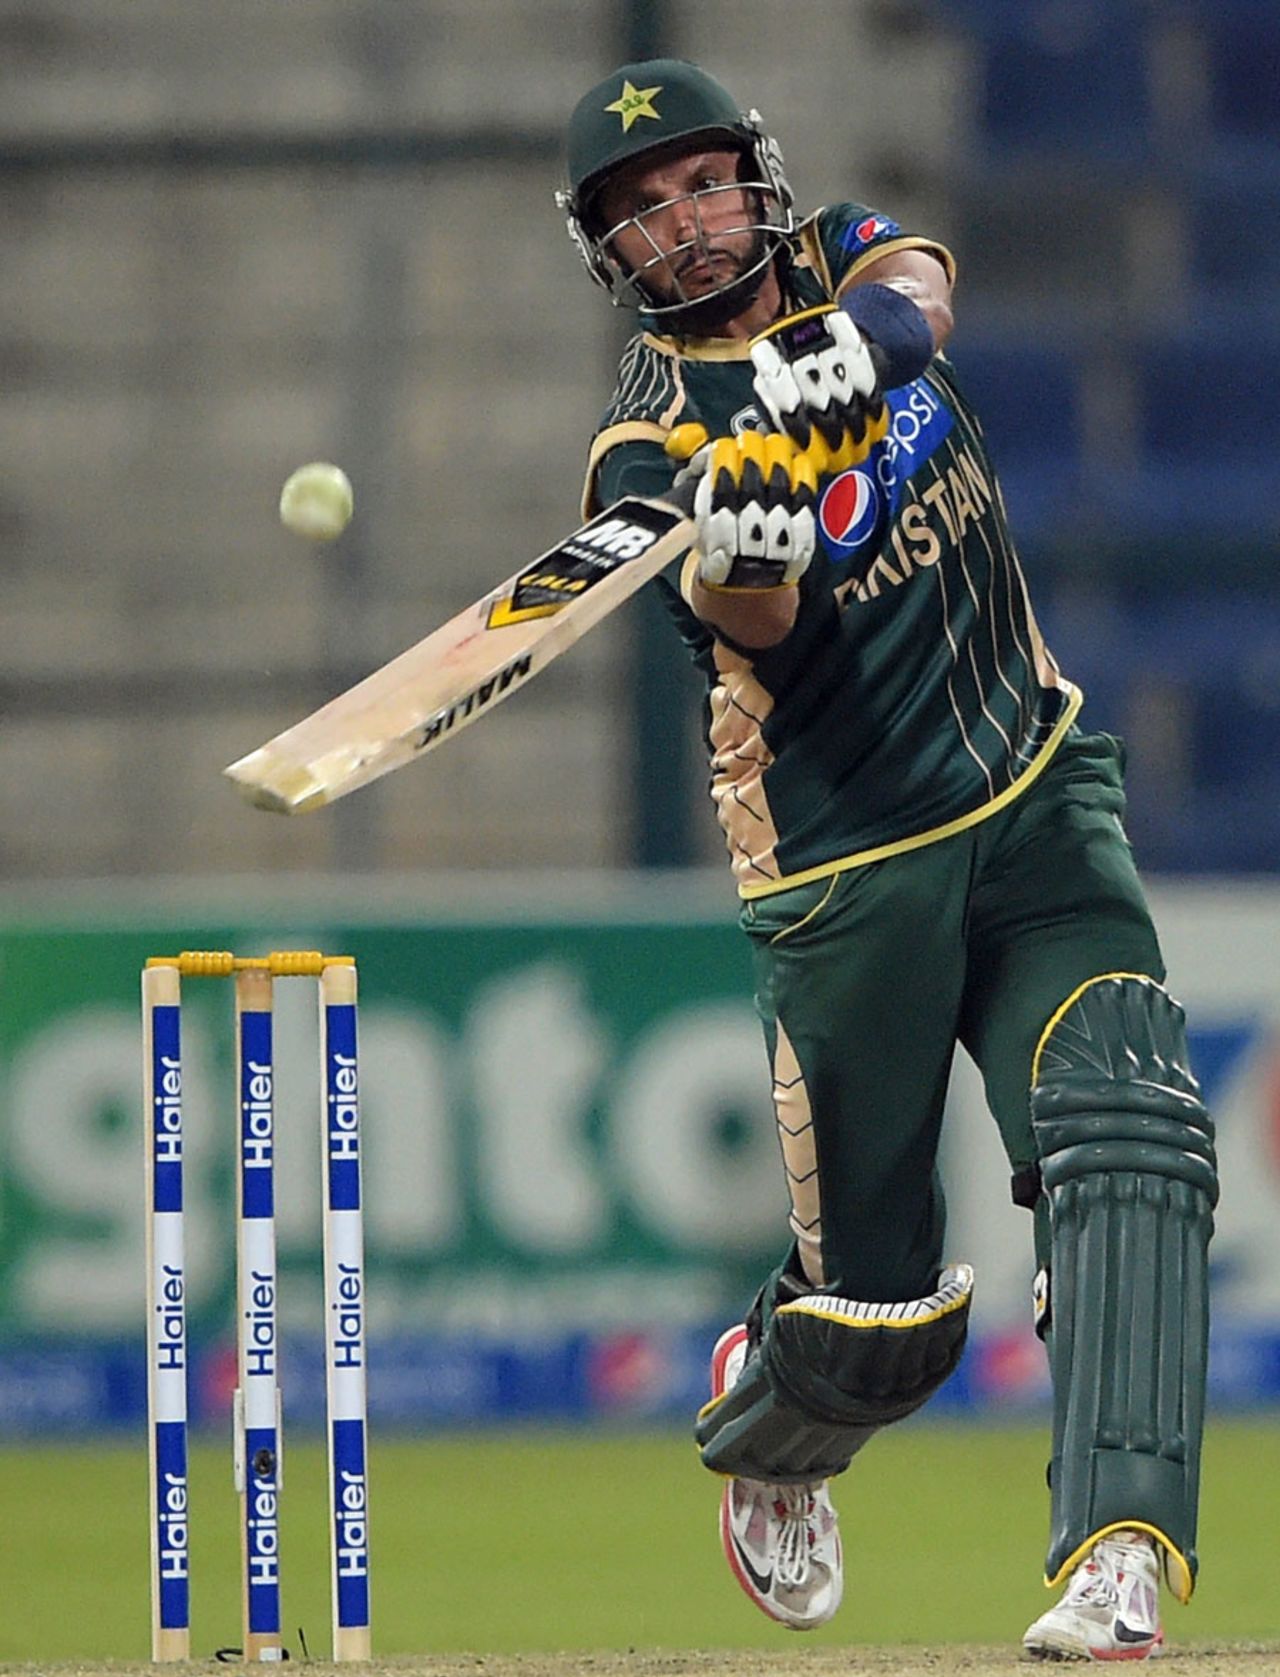 Shahid Afridi launches a six over mid-off, Pakistan v New Zealand, 4th ODI, Abu Dhabi, December 17, 2014